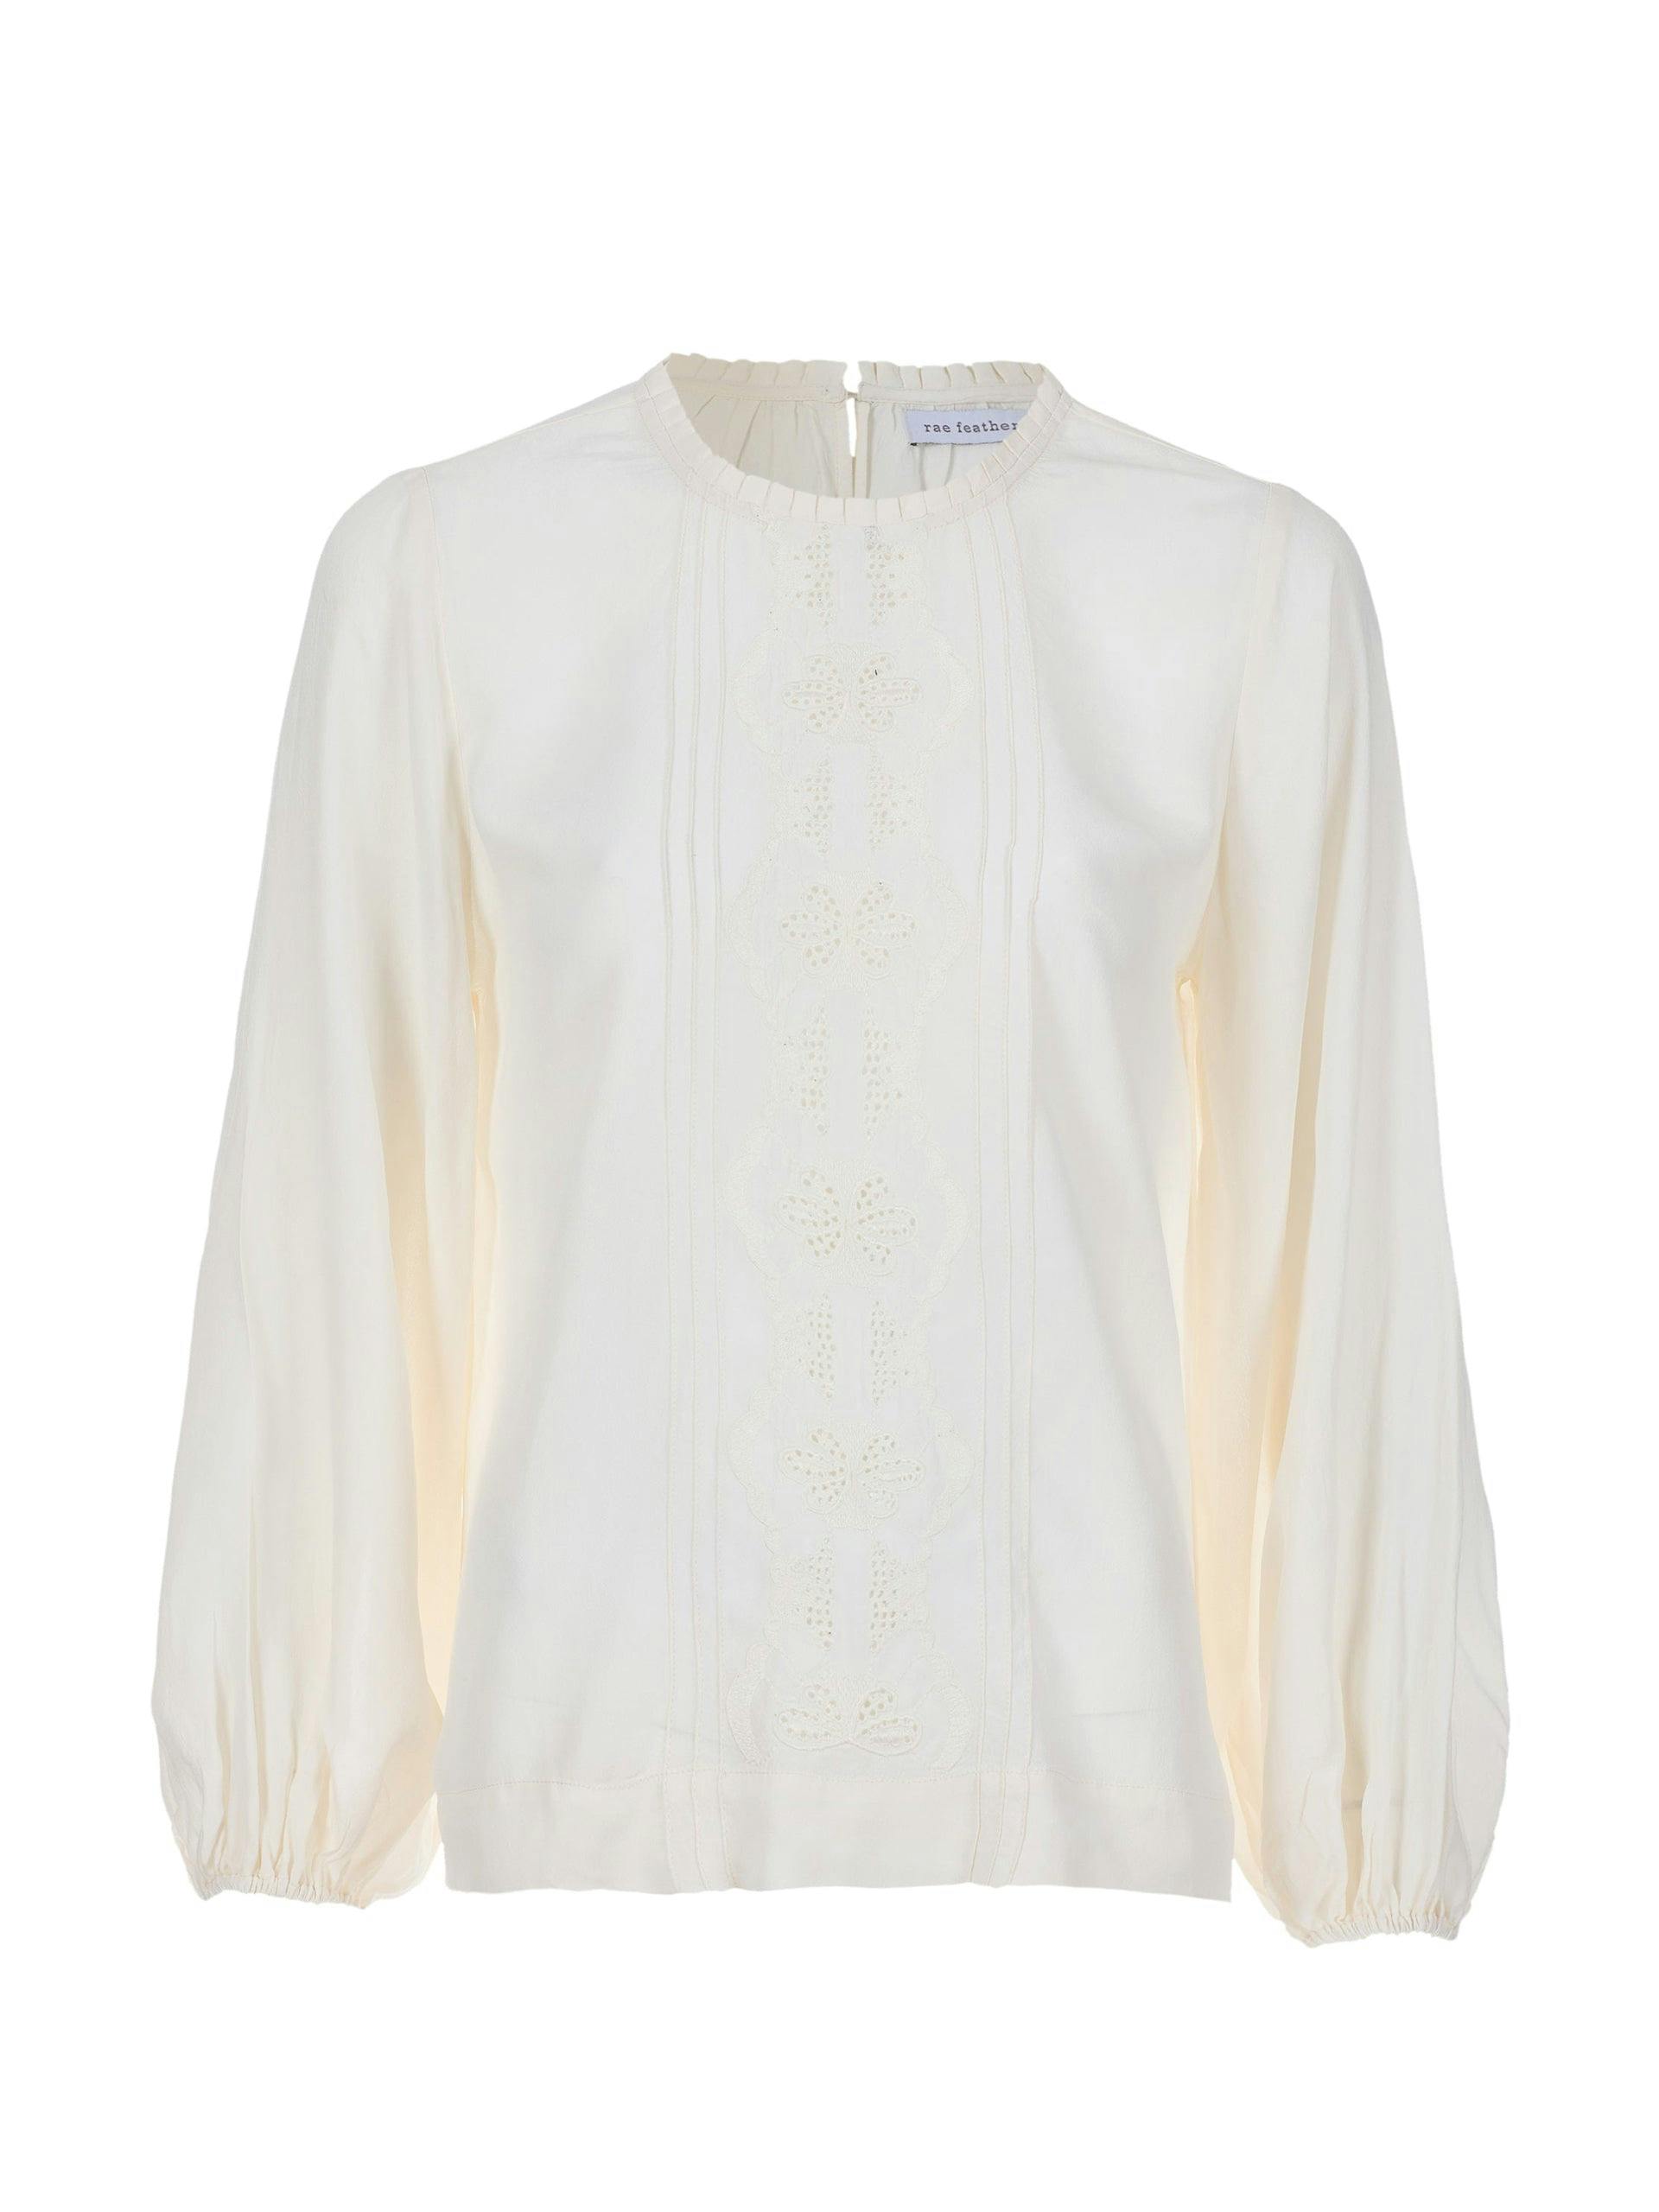 Sam Mulberry crepe blouse